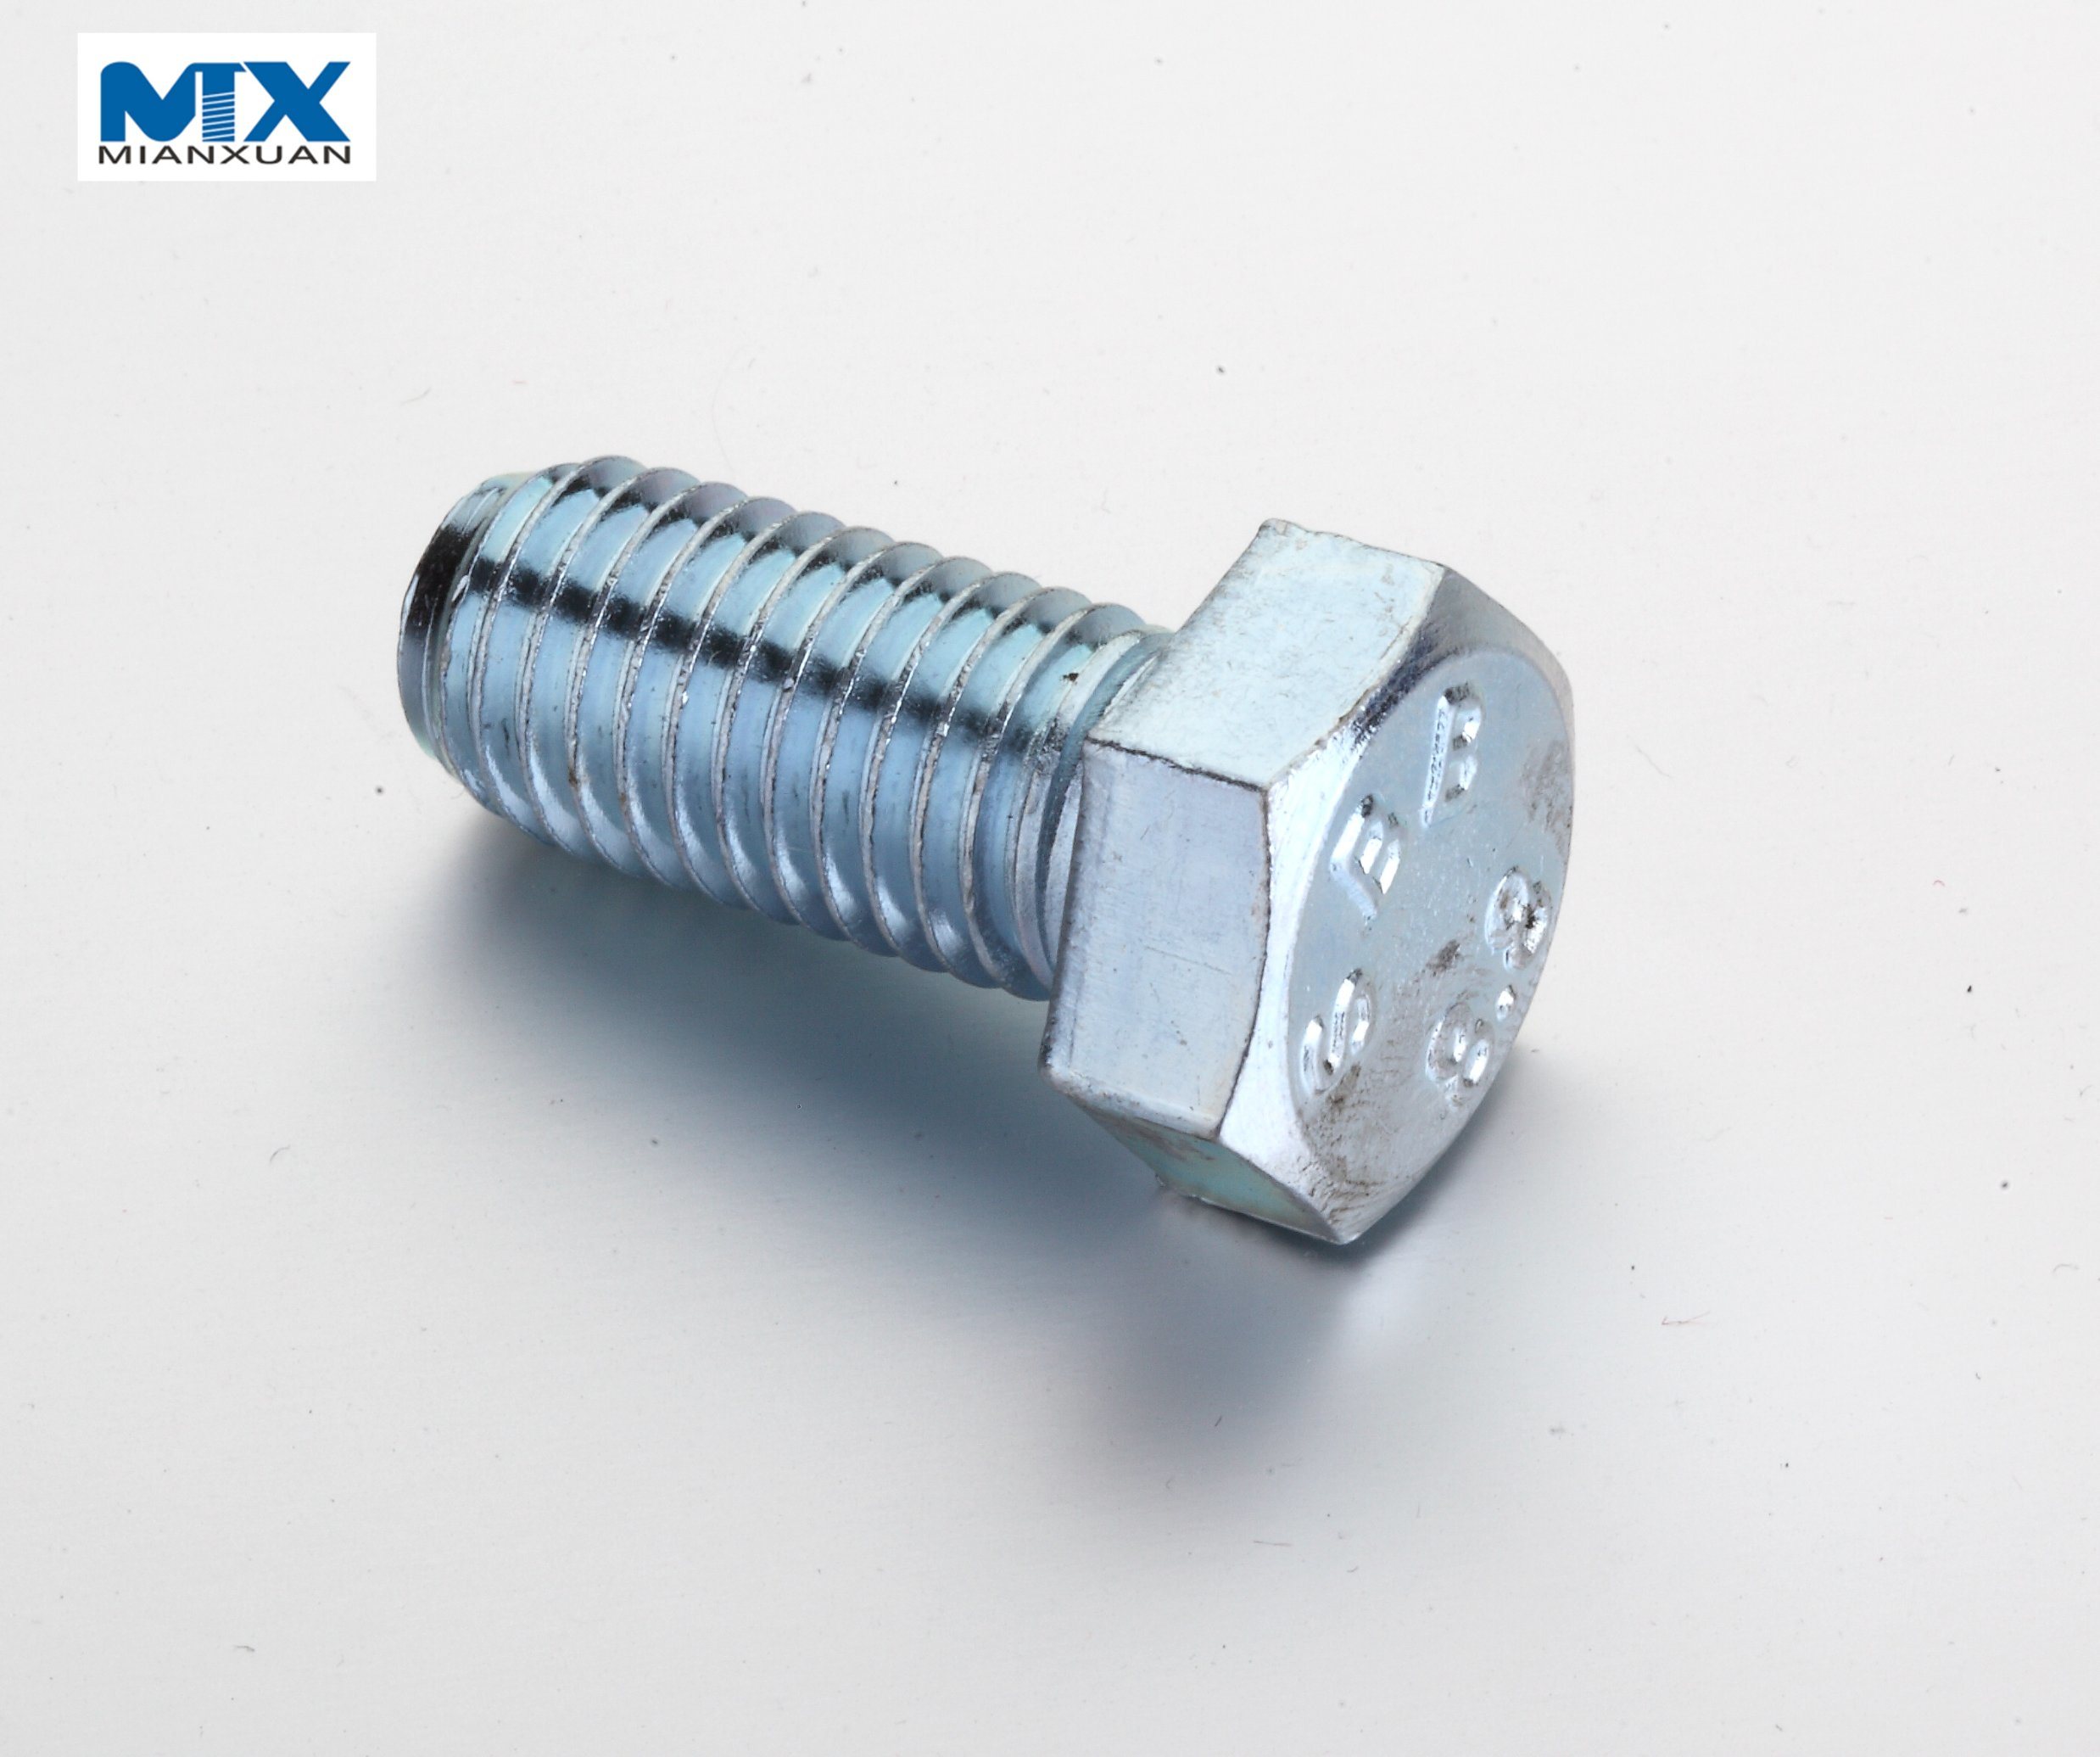 Hexagon Head Bolts with Hexagon Nut for Steel Structures